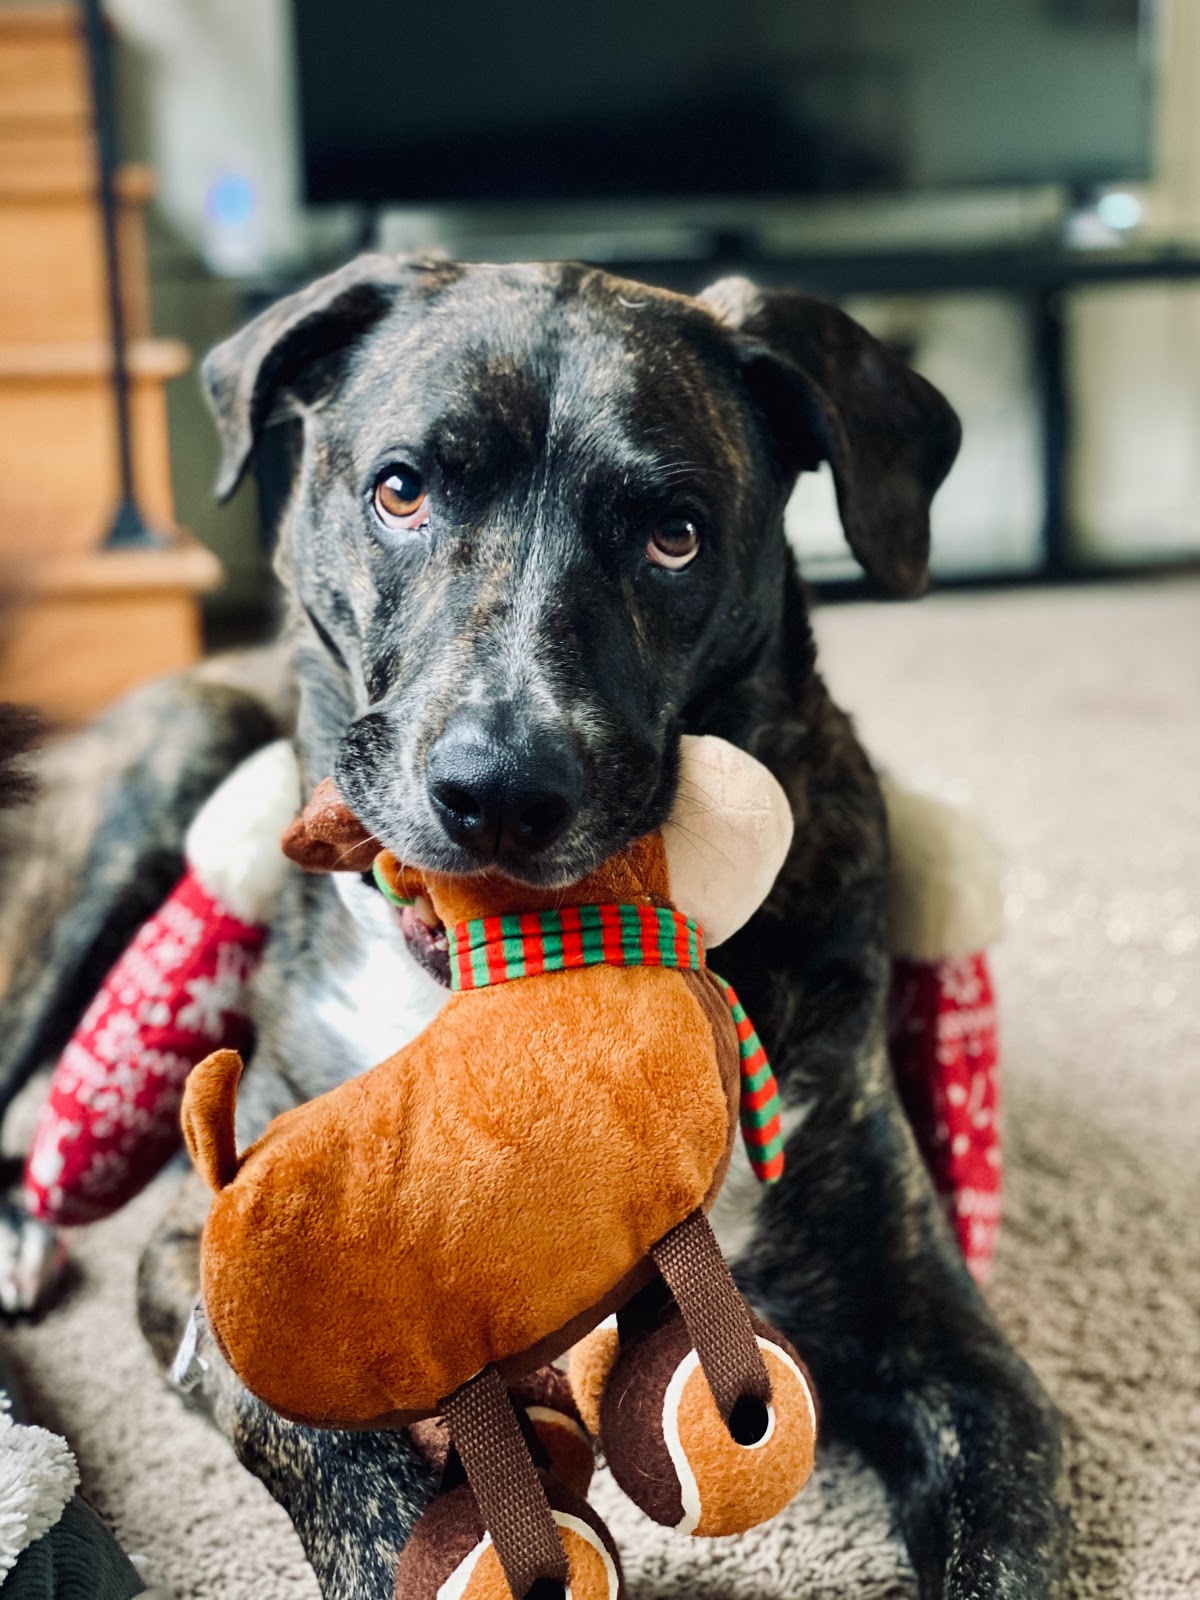 Dog with Toy in Mouth